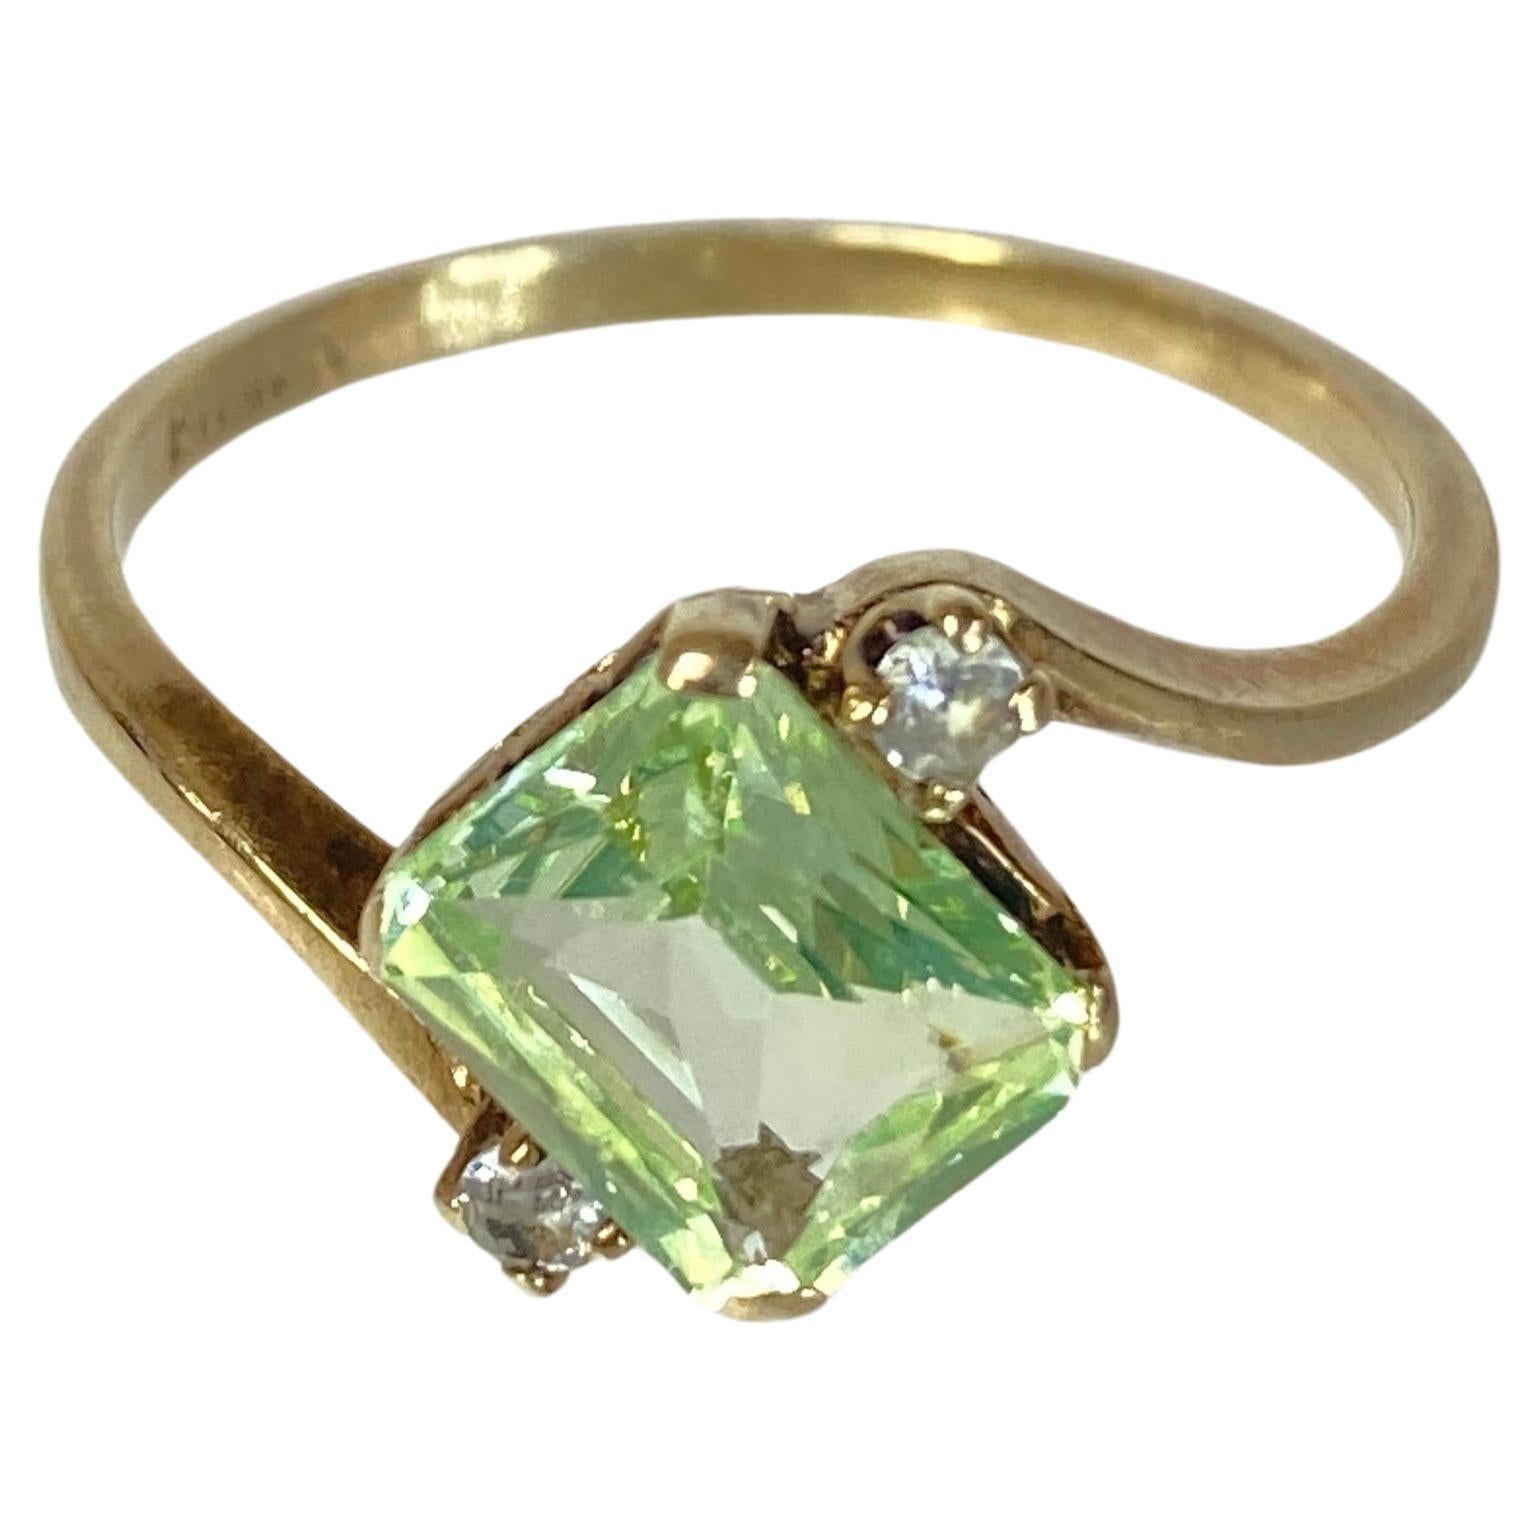 10K Yellow Gold Old Fashioned Emerald Cut Green Beryl Solitaire Ring Size 8.25